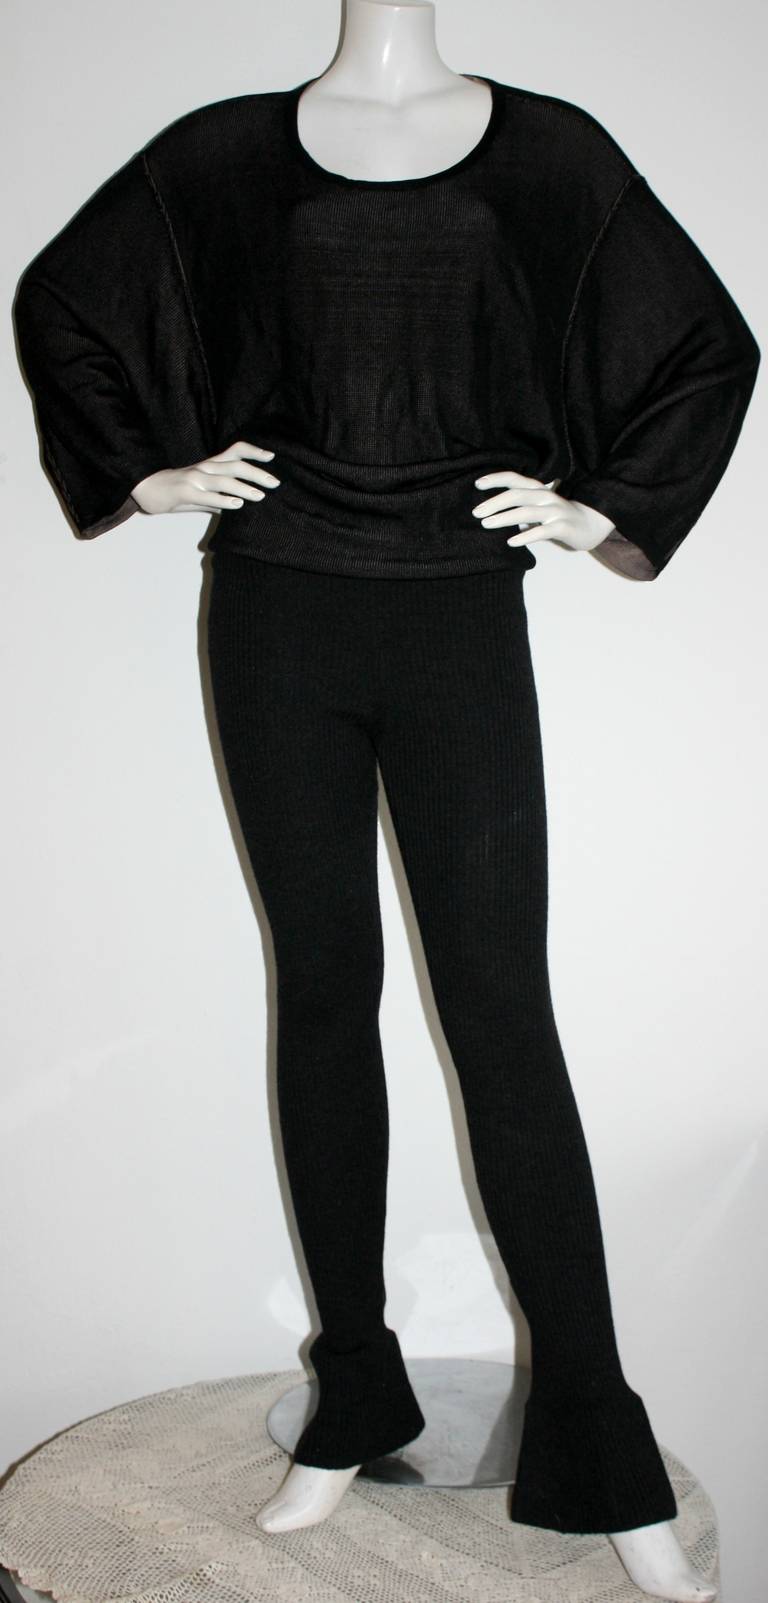 Flattering pair of vintage Prada leggings, with stirrups at hem to hold leggings in place. These were featured in a 